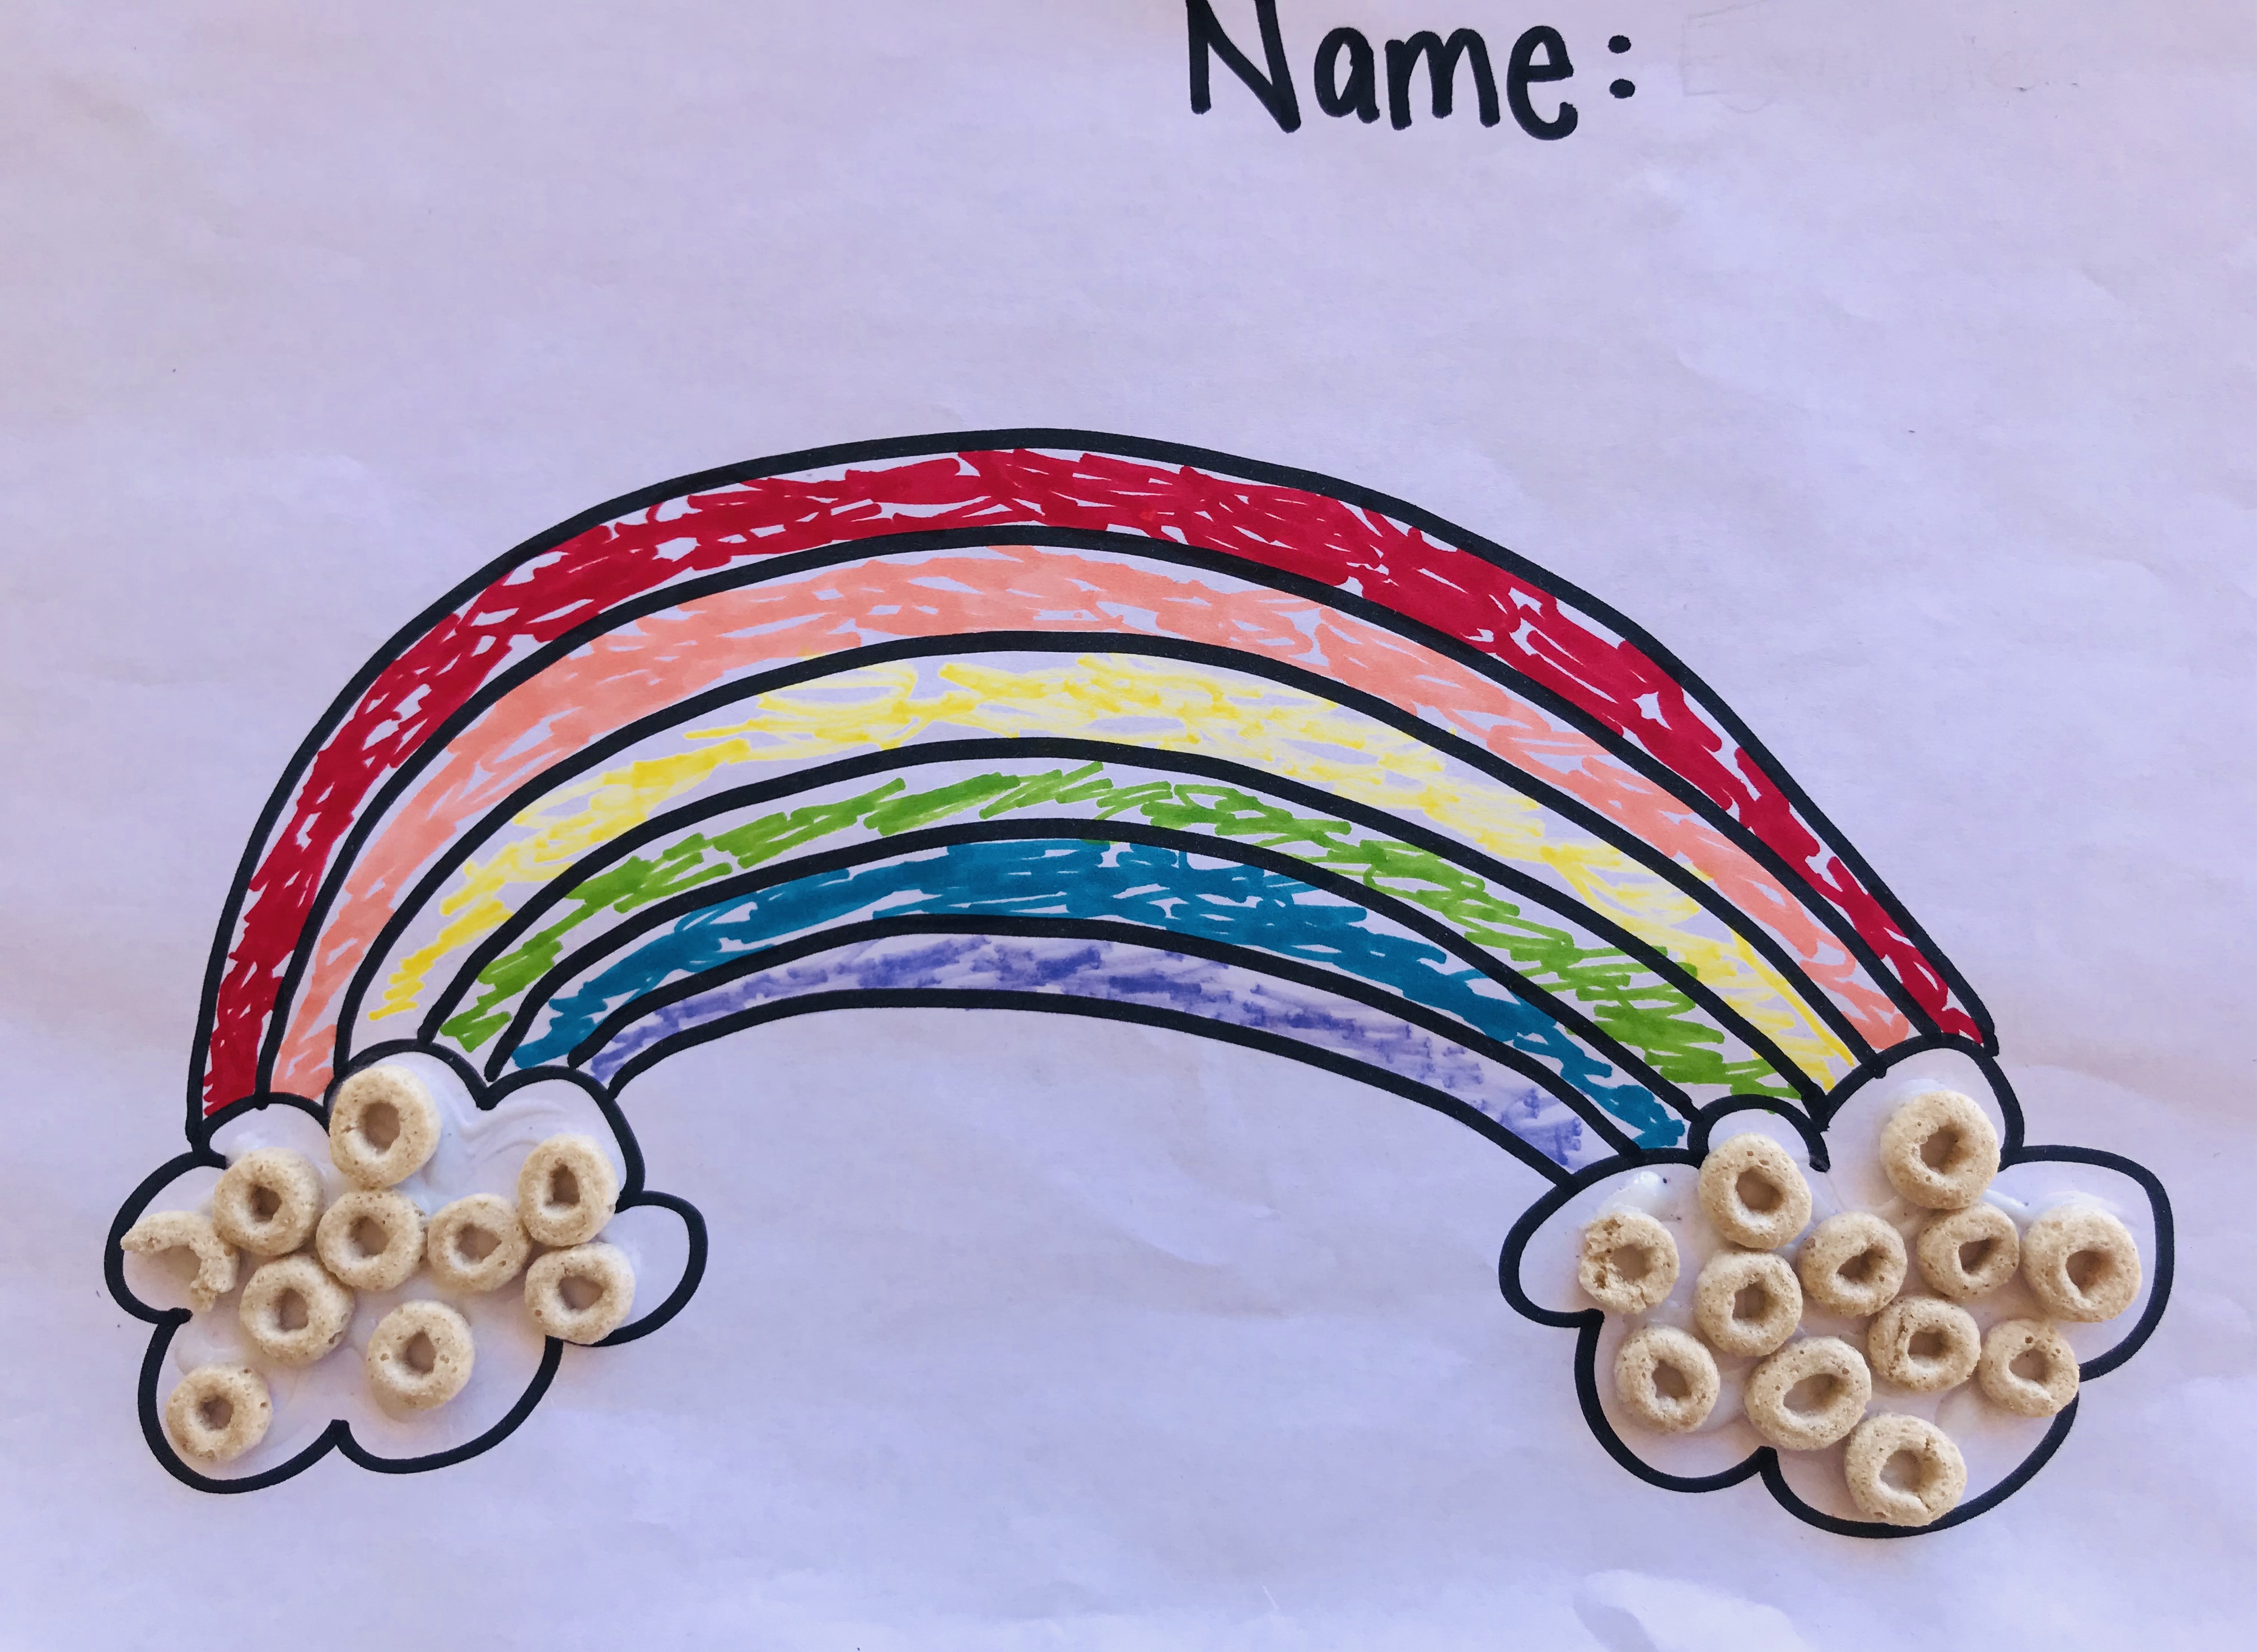 Colored rainbow printout with Cheerio clouds